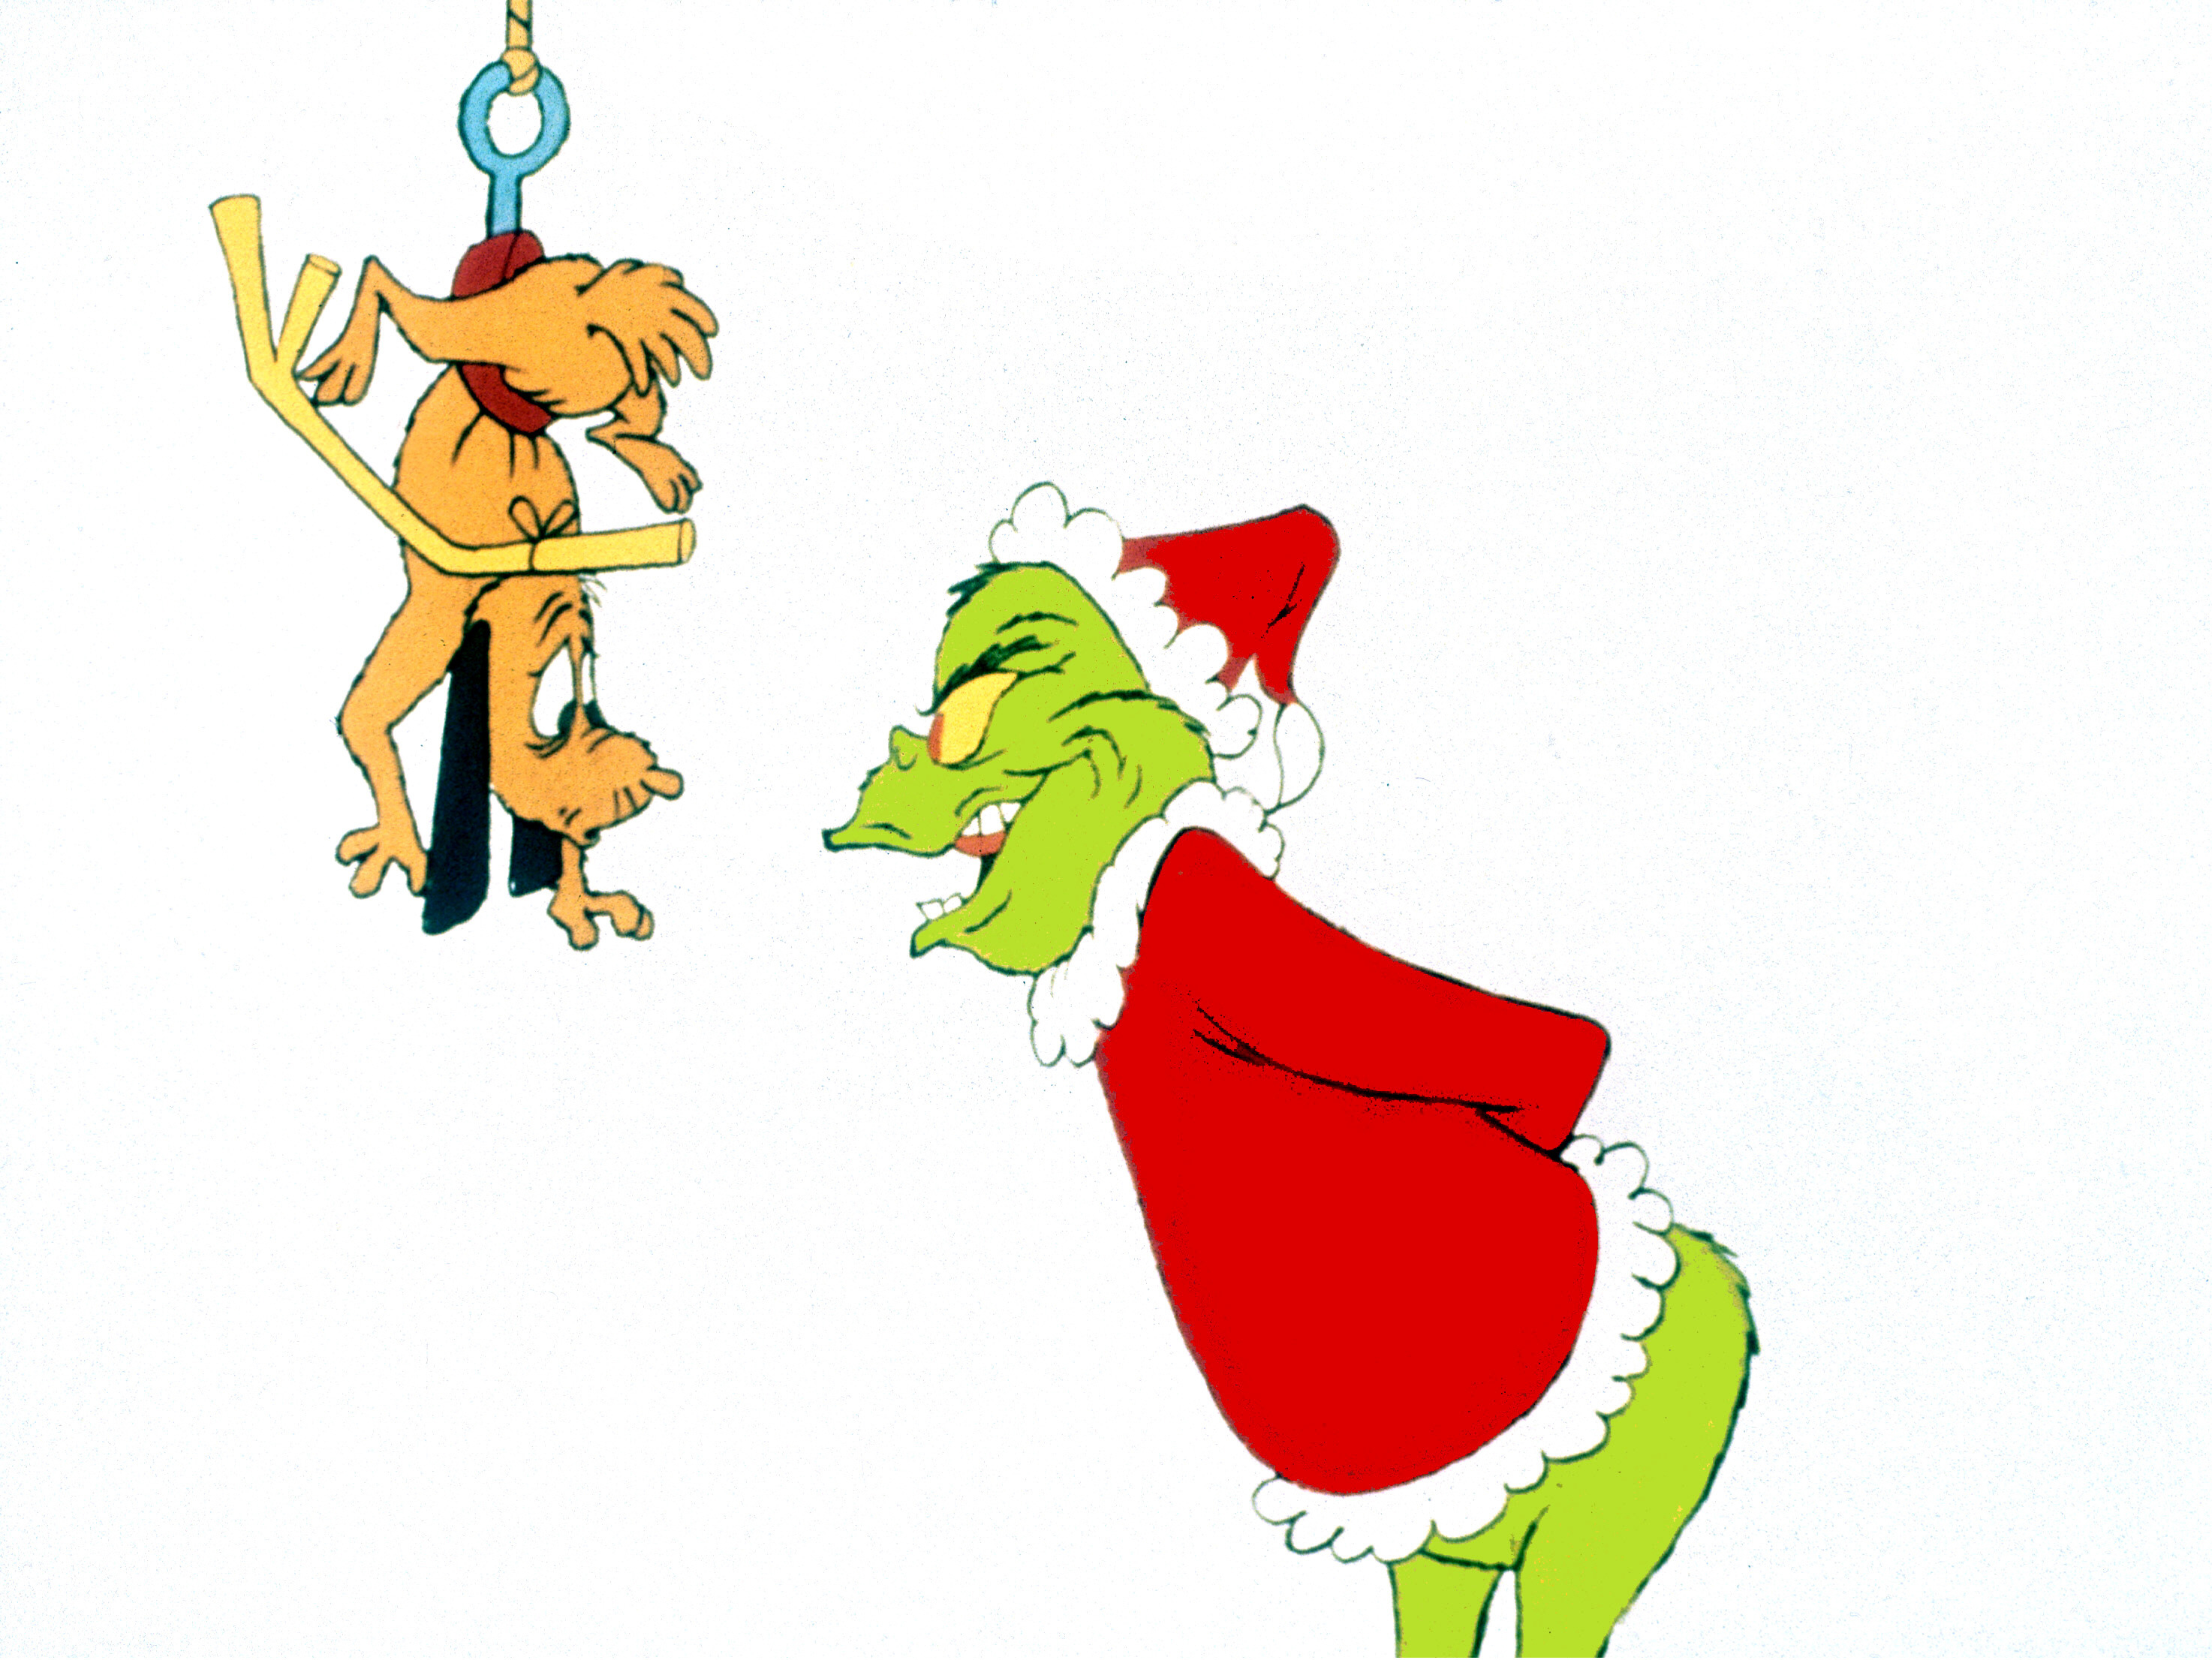 Grinch Stole Christmas Clip Art free image.